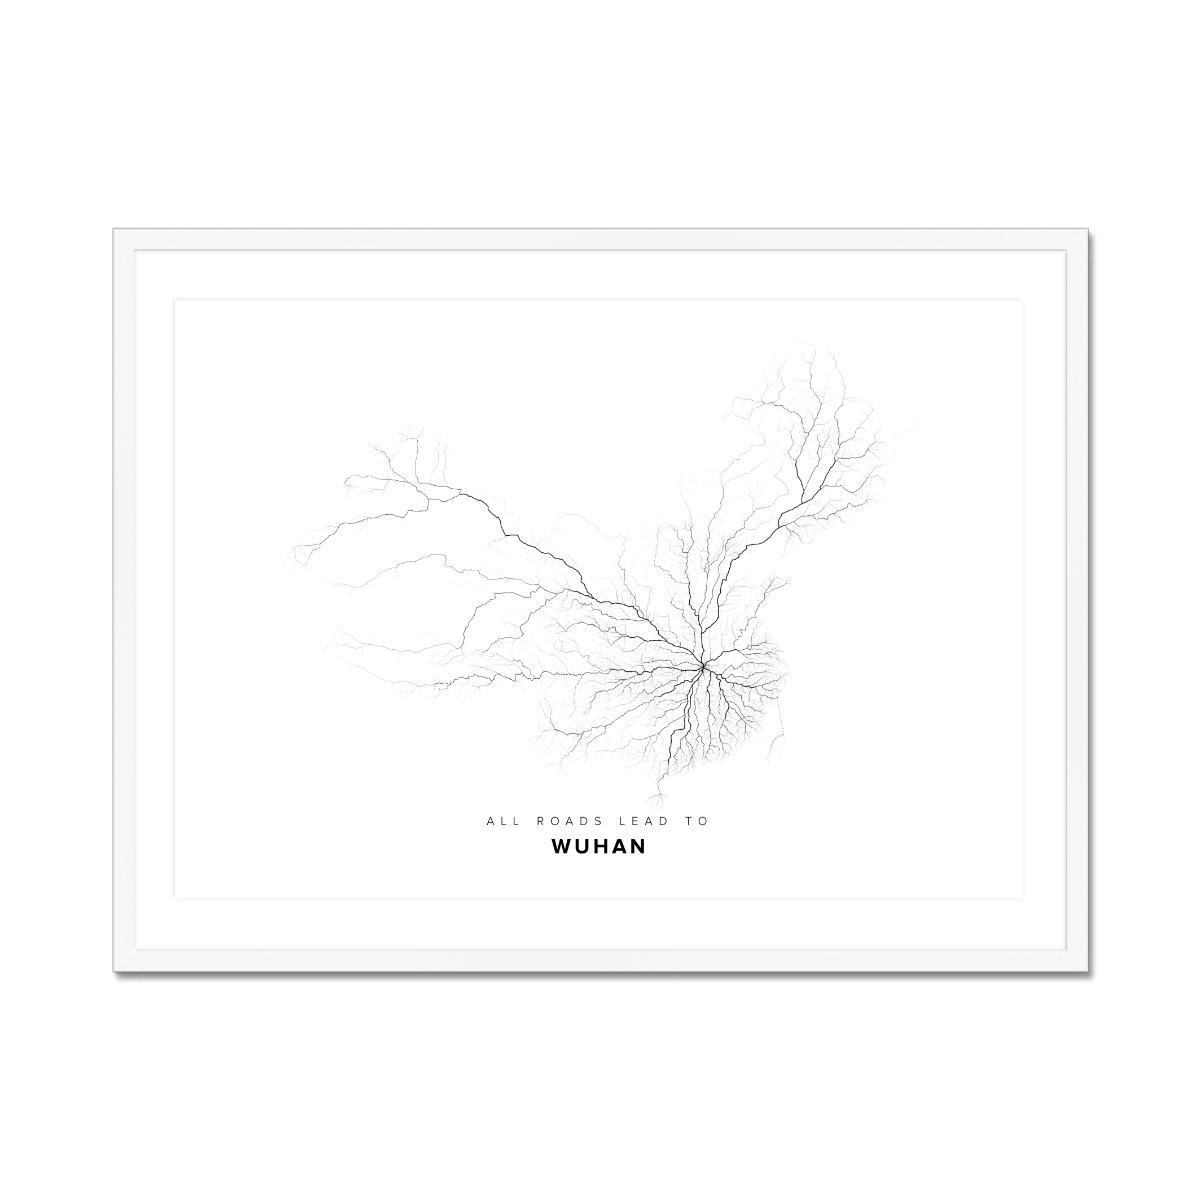 All roads lead to Wuhan (China) Fine Art Map Print